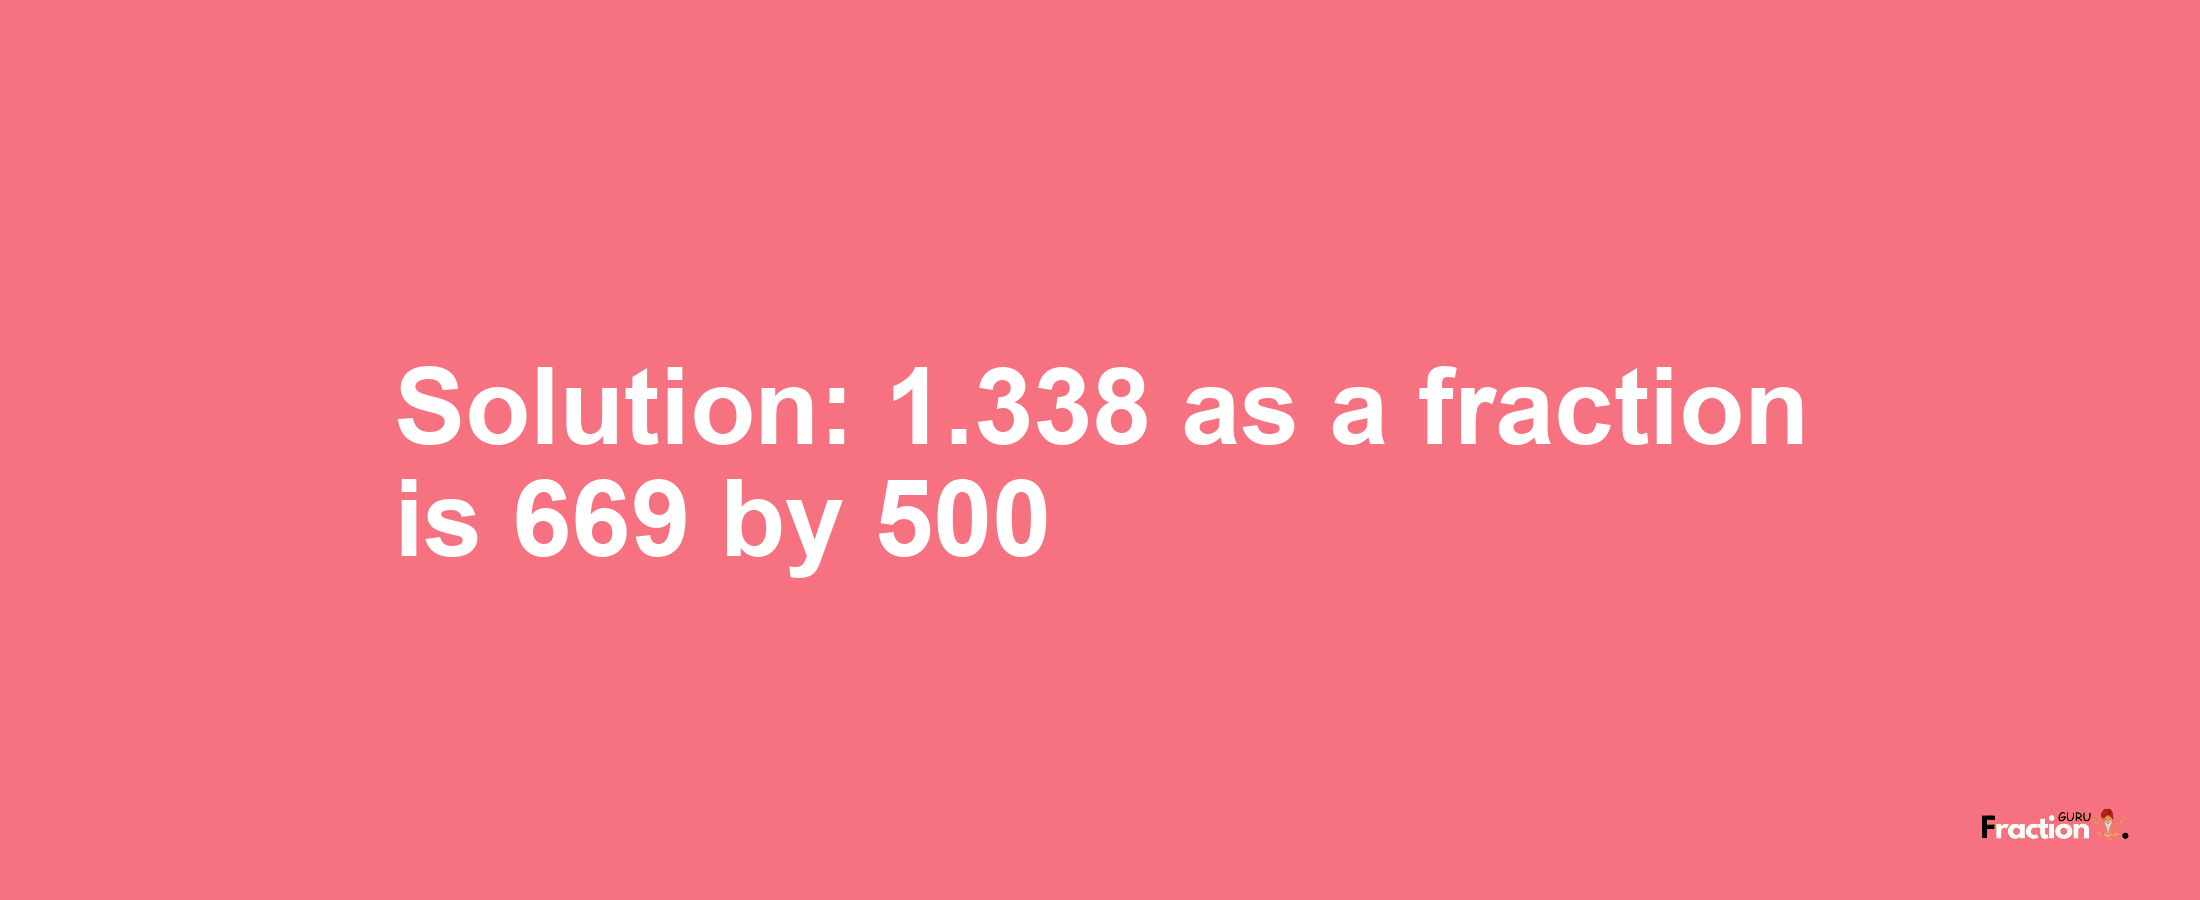 Solution:1.338 as a fraction is 669/500